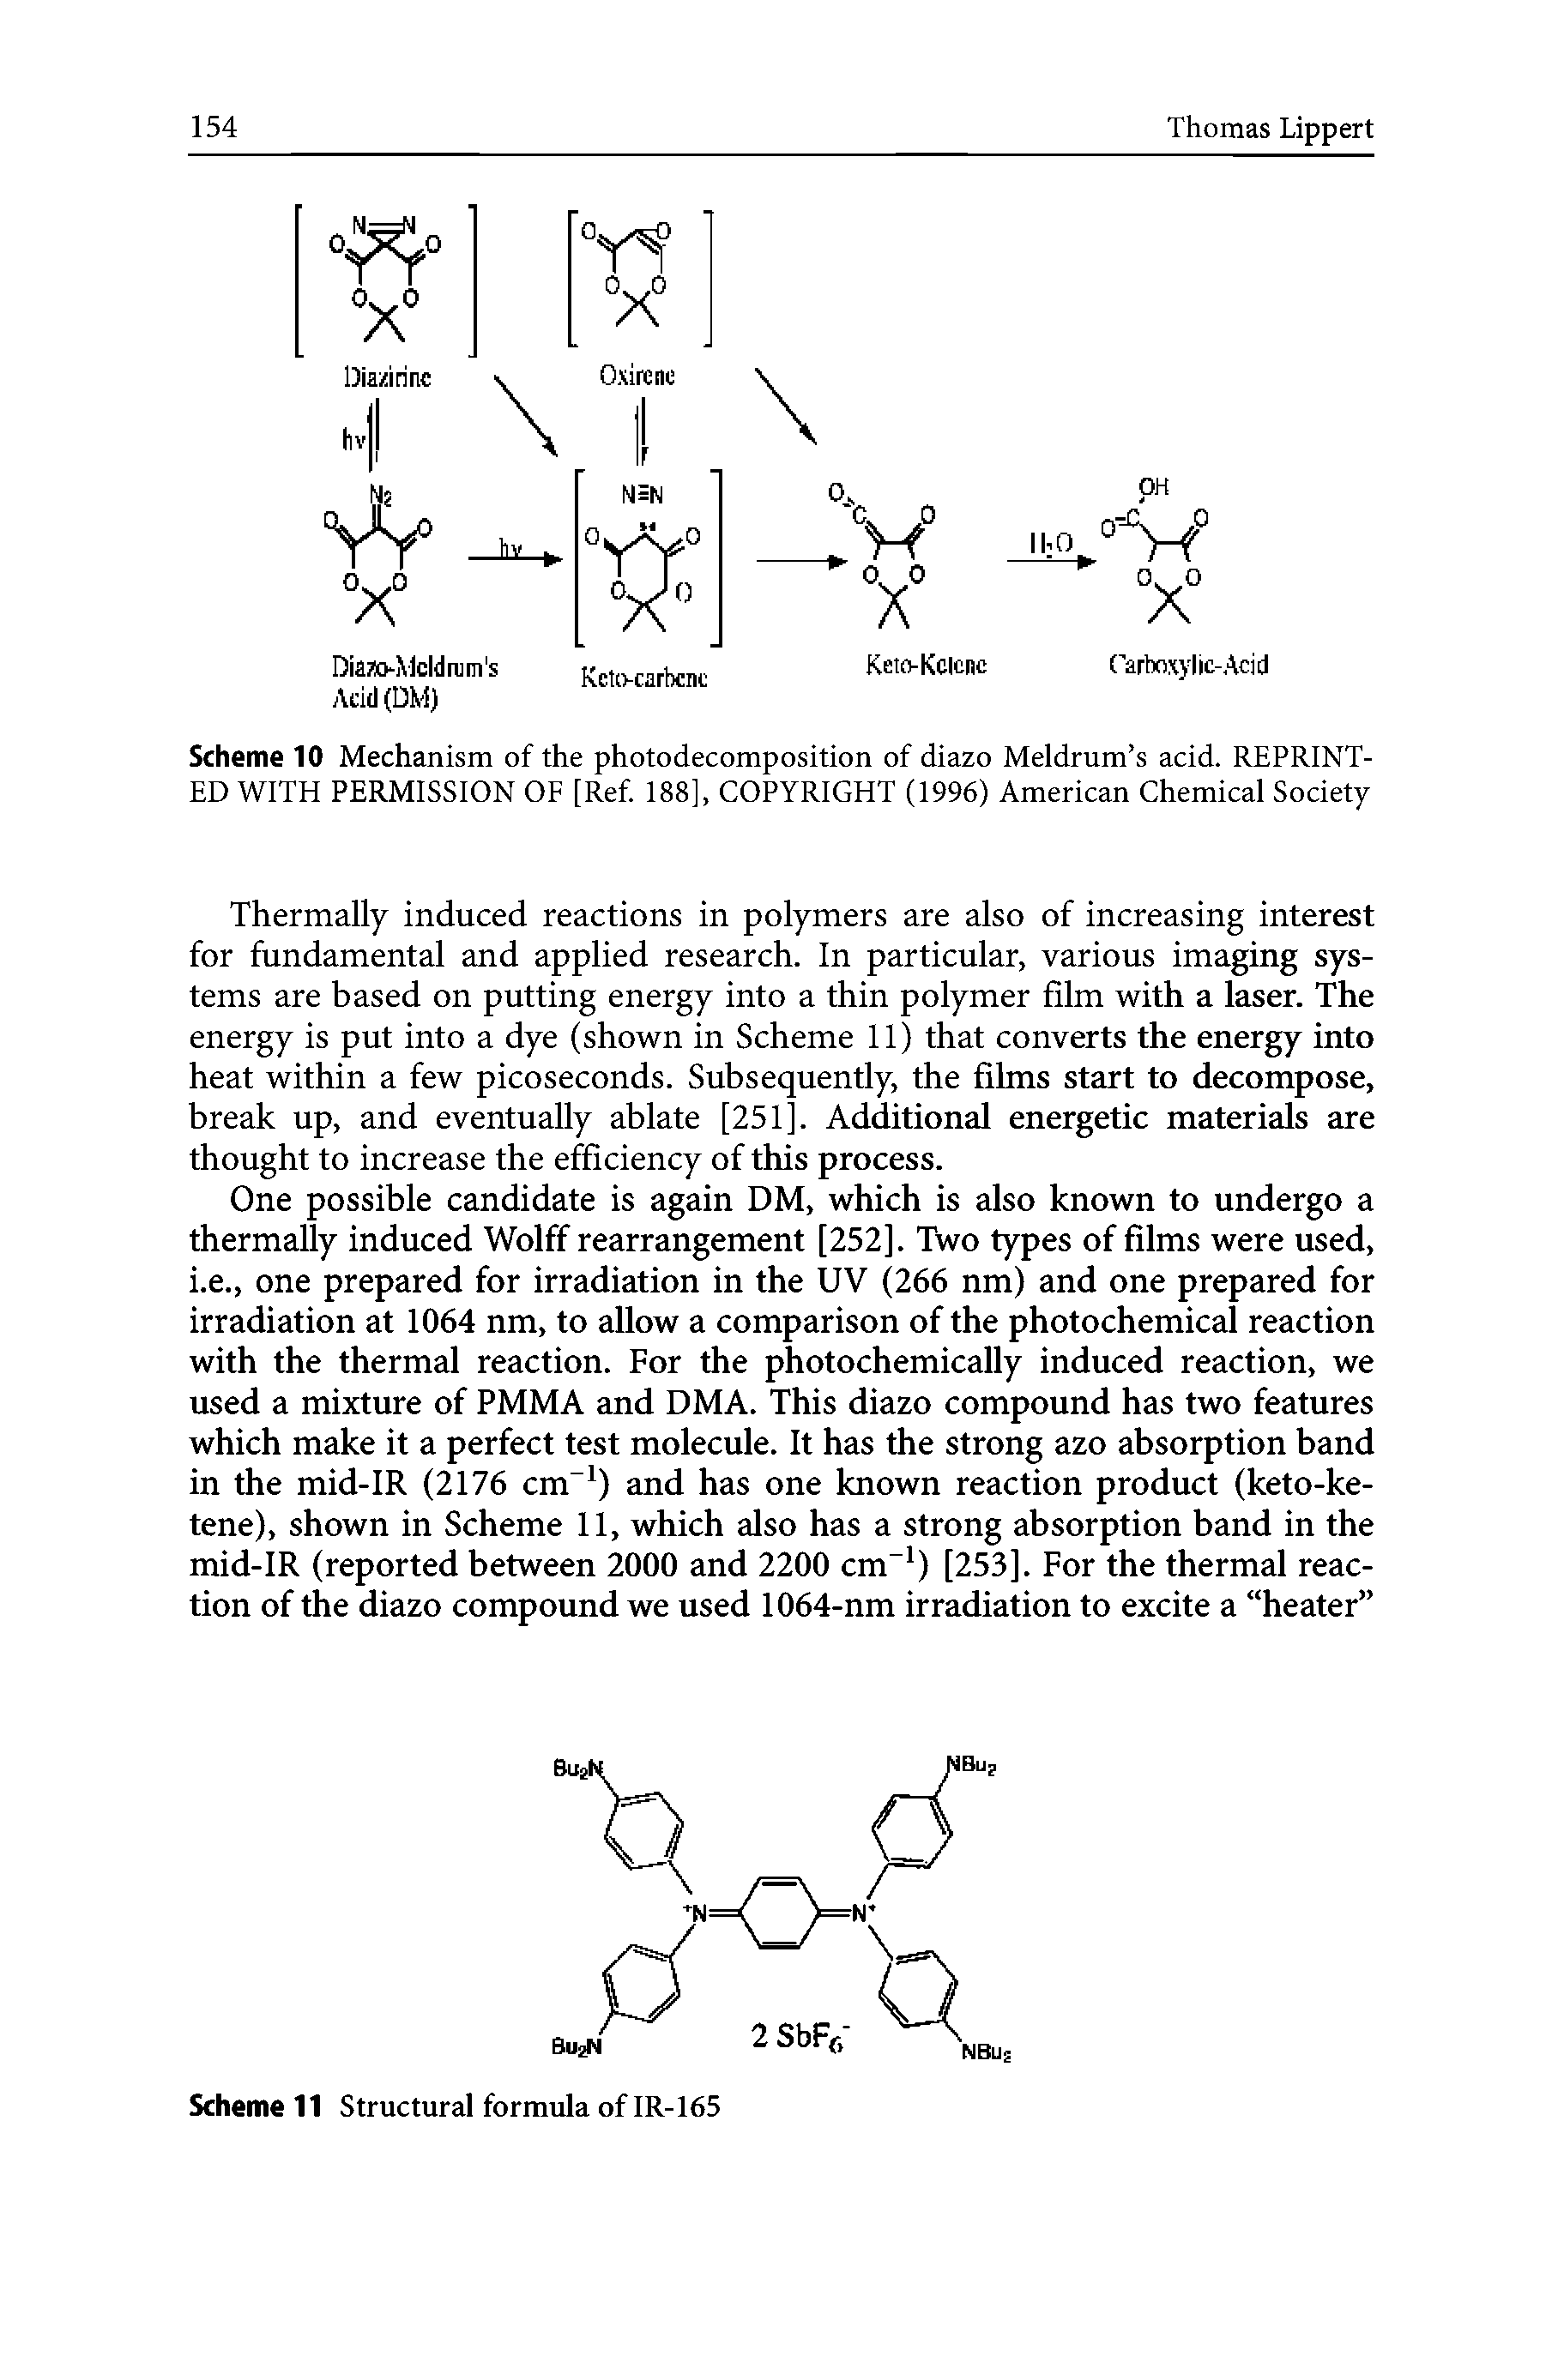 Scheme 10 Mechanism of the photodecomposition of diazo Meldrum s acid. REPRINTED WITH PERMISSION OF [Ref. 188], COPYRIGHT (1996) American Chemical Society...